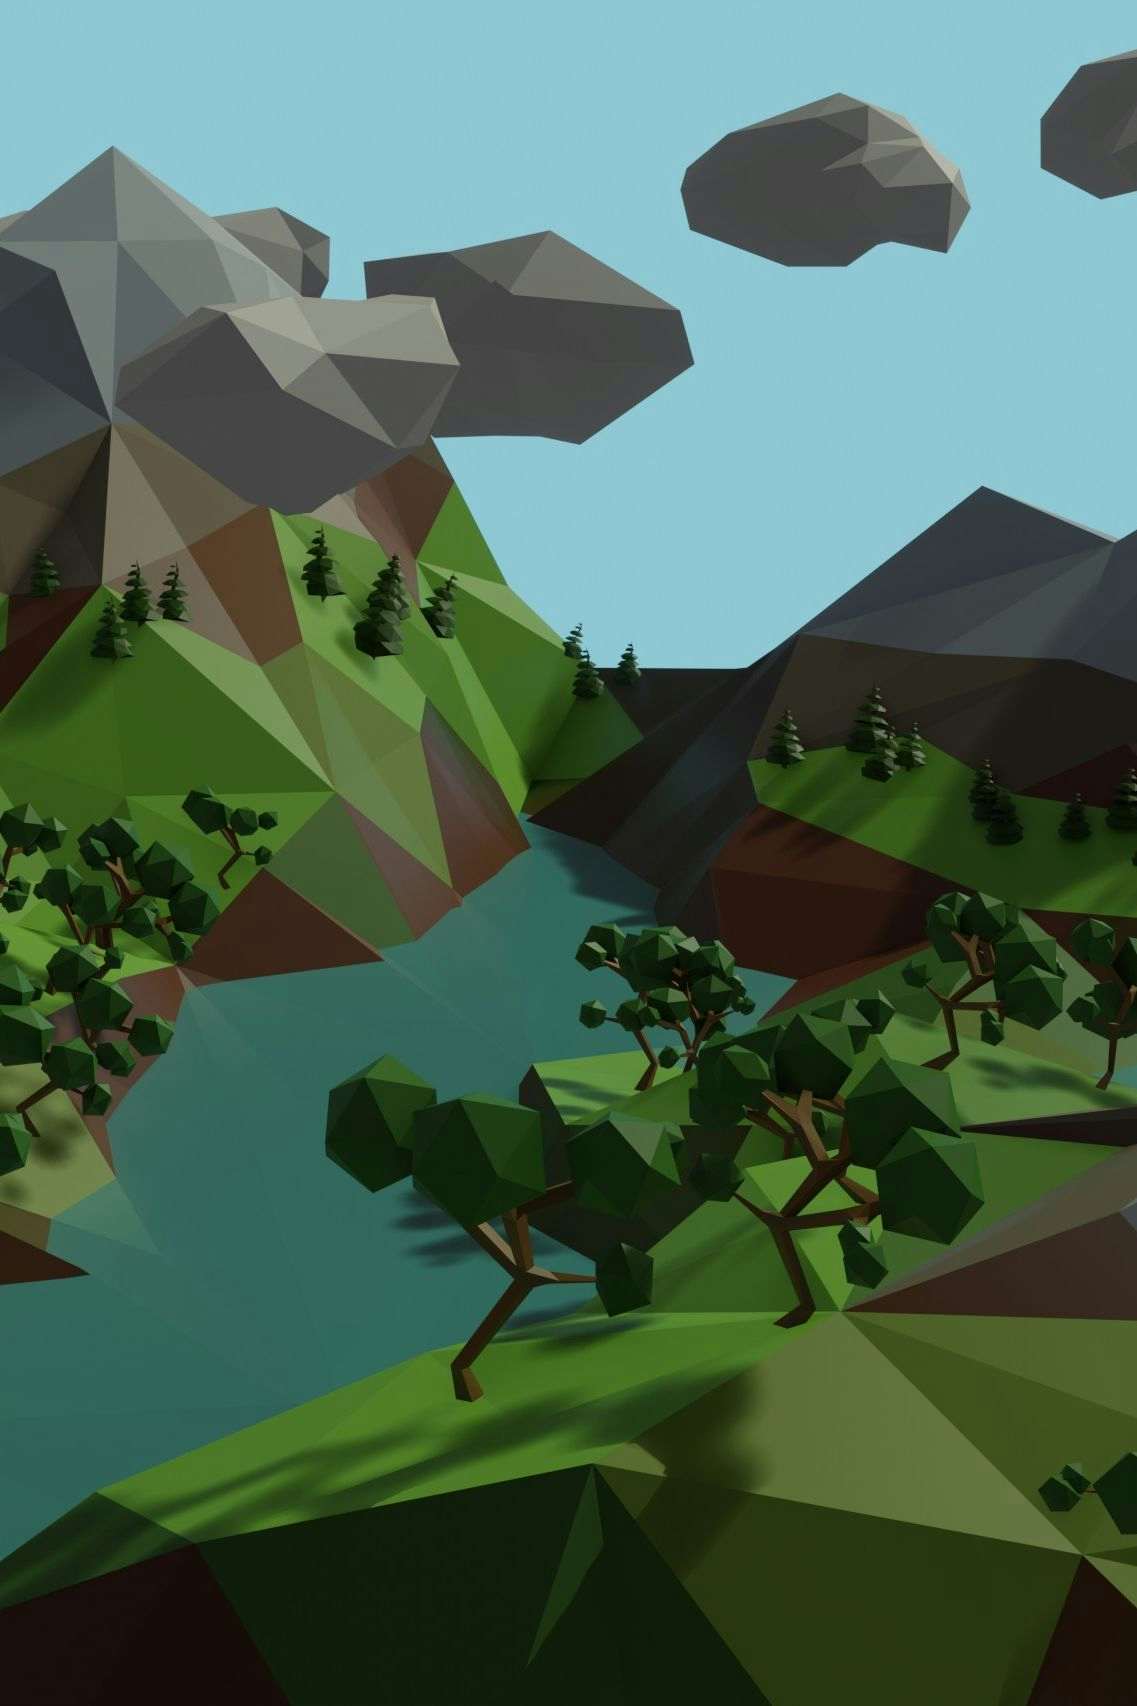 Low poly 3D landscape scene created in Blender by Xavier Wendling